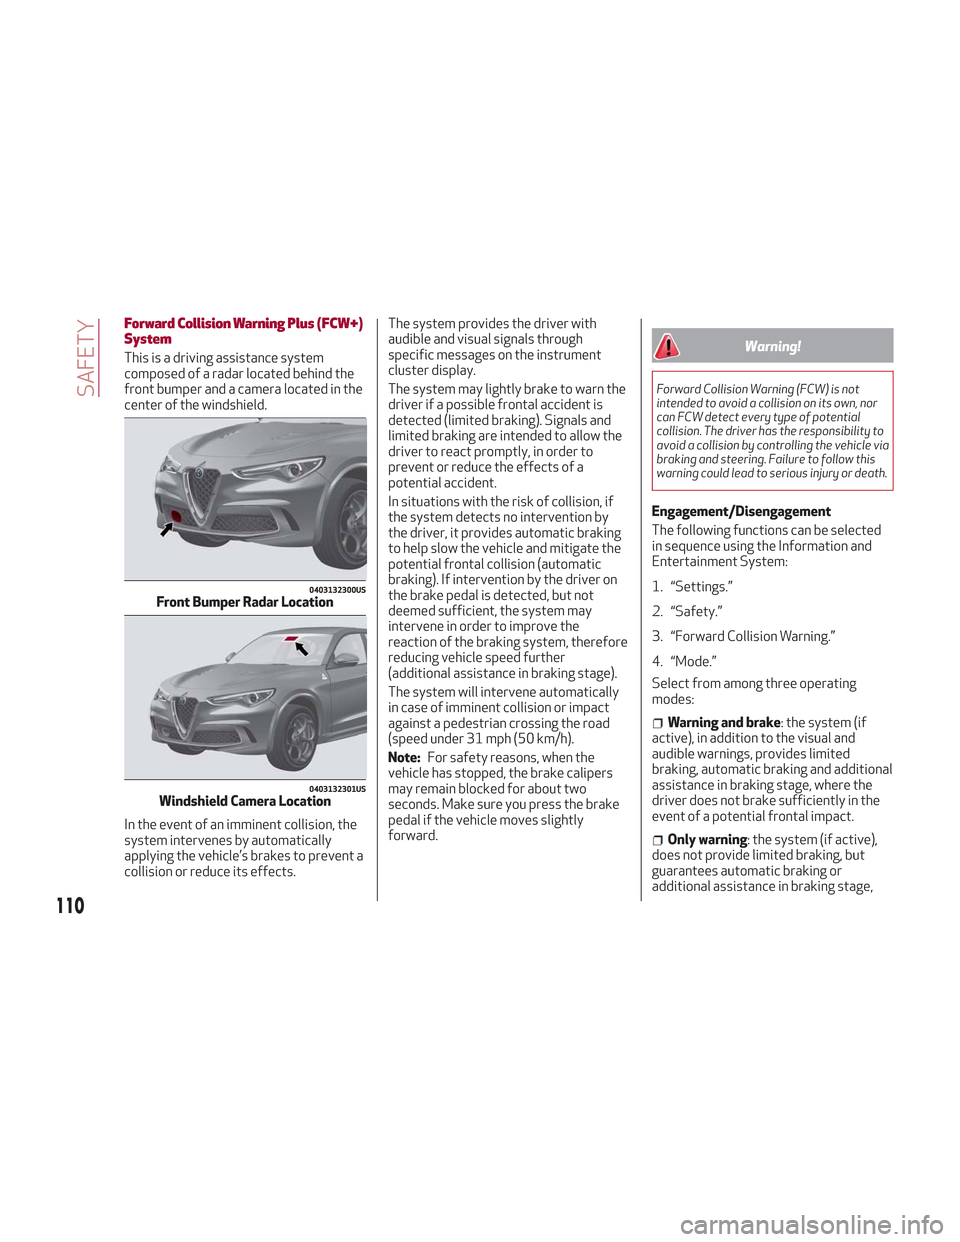 Alfa Romeo Stelvio 2018 Owners Guide Forward Collision Warning Plus (FCW+)
System
This is a driving assistance system
composed of a radar located behind the
front bumper and a camera located in the
center of the windshield.
In the event 